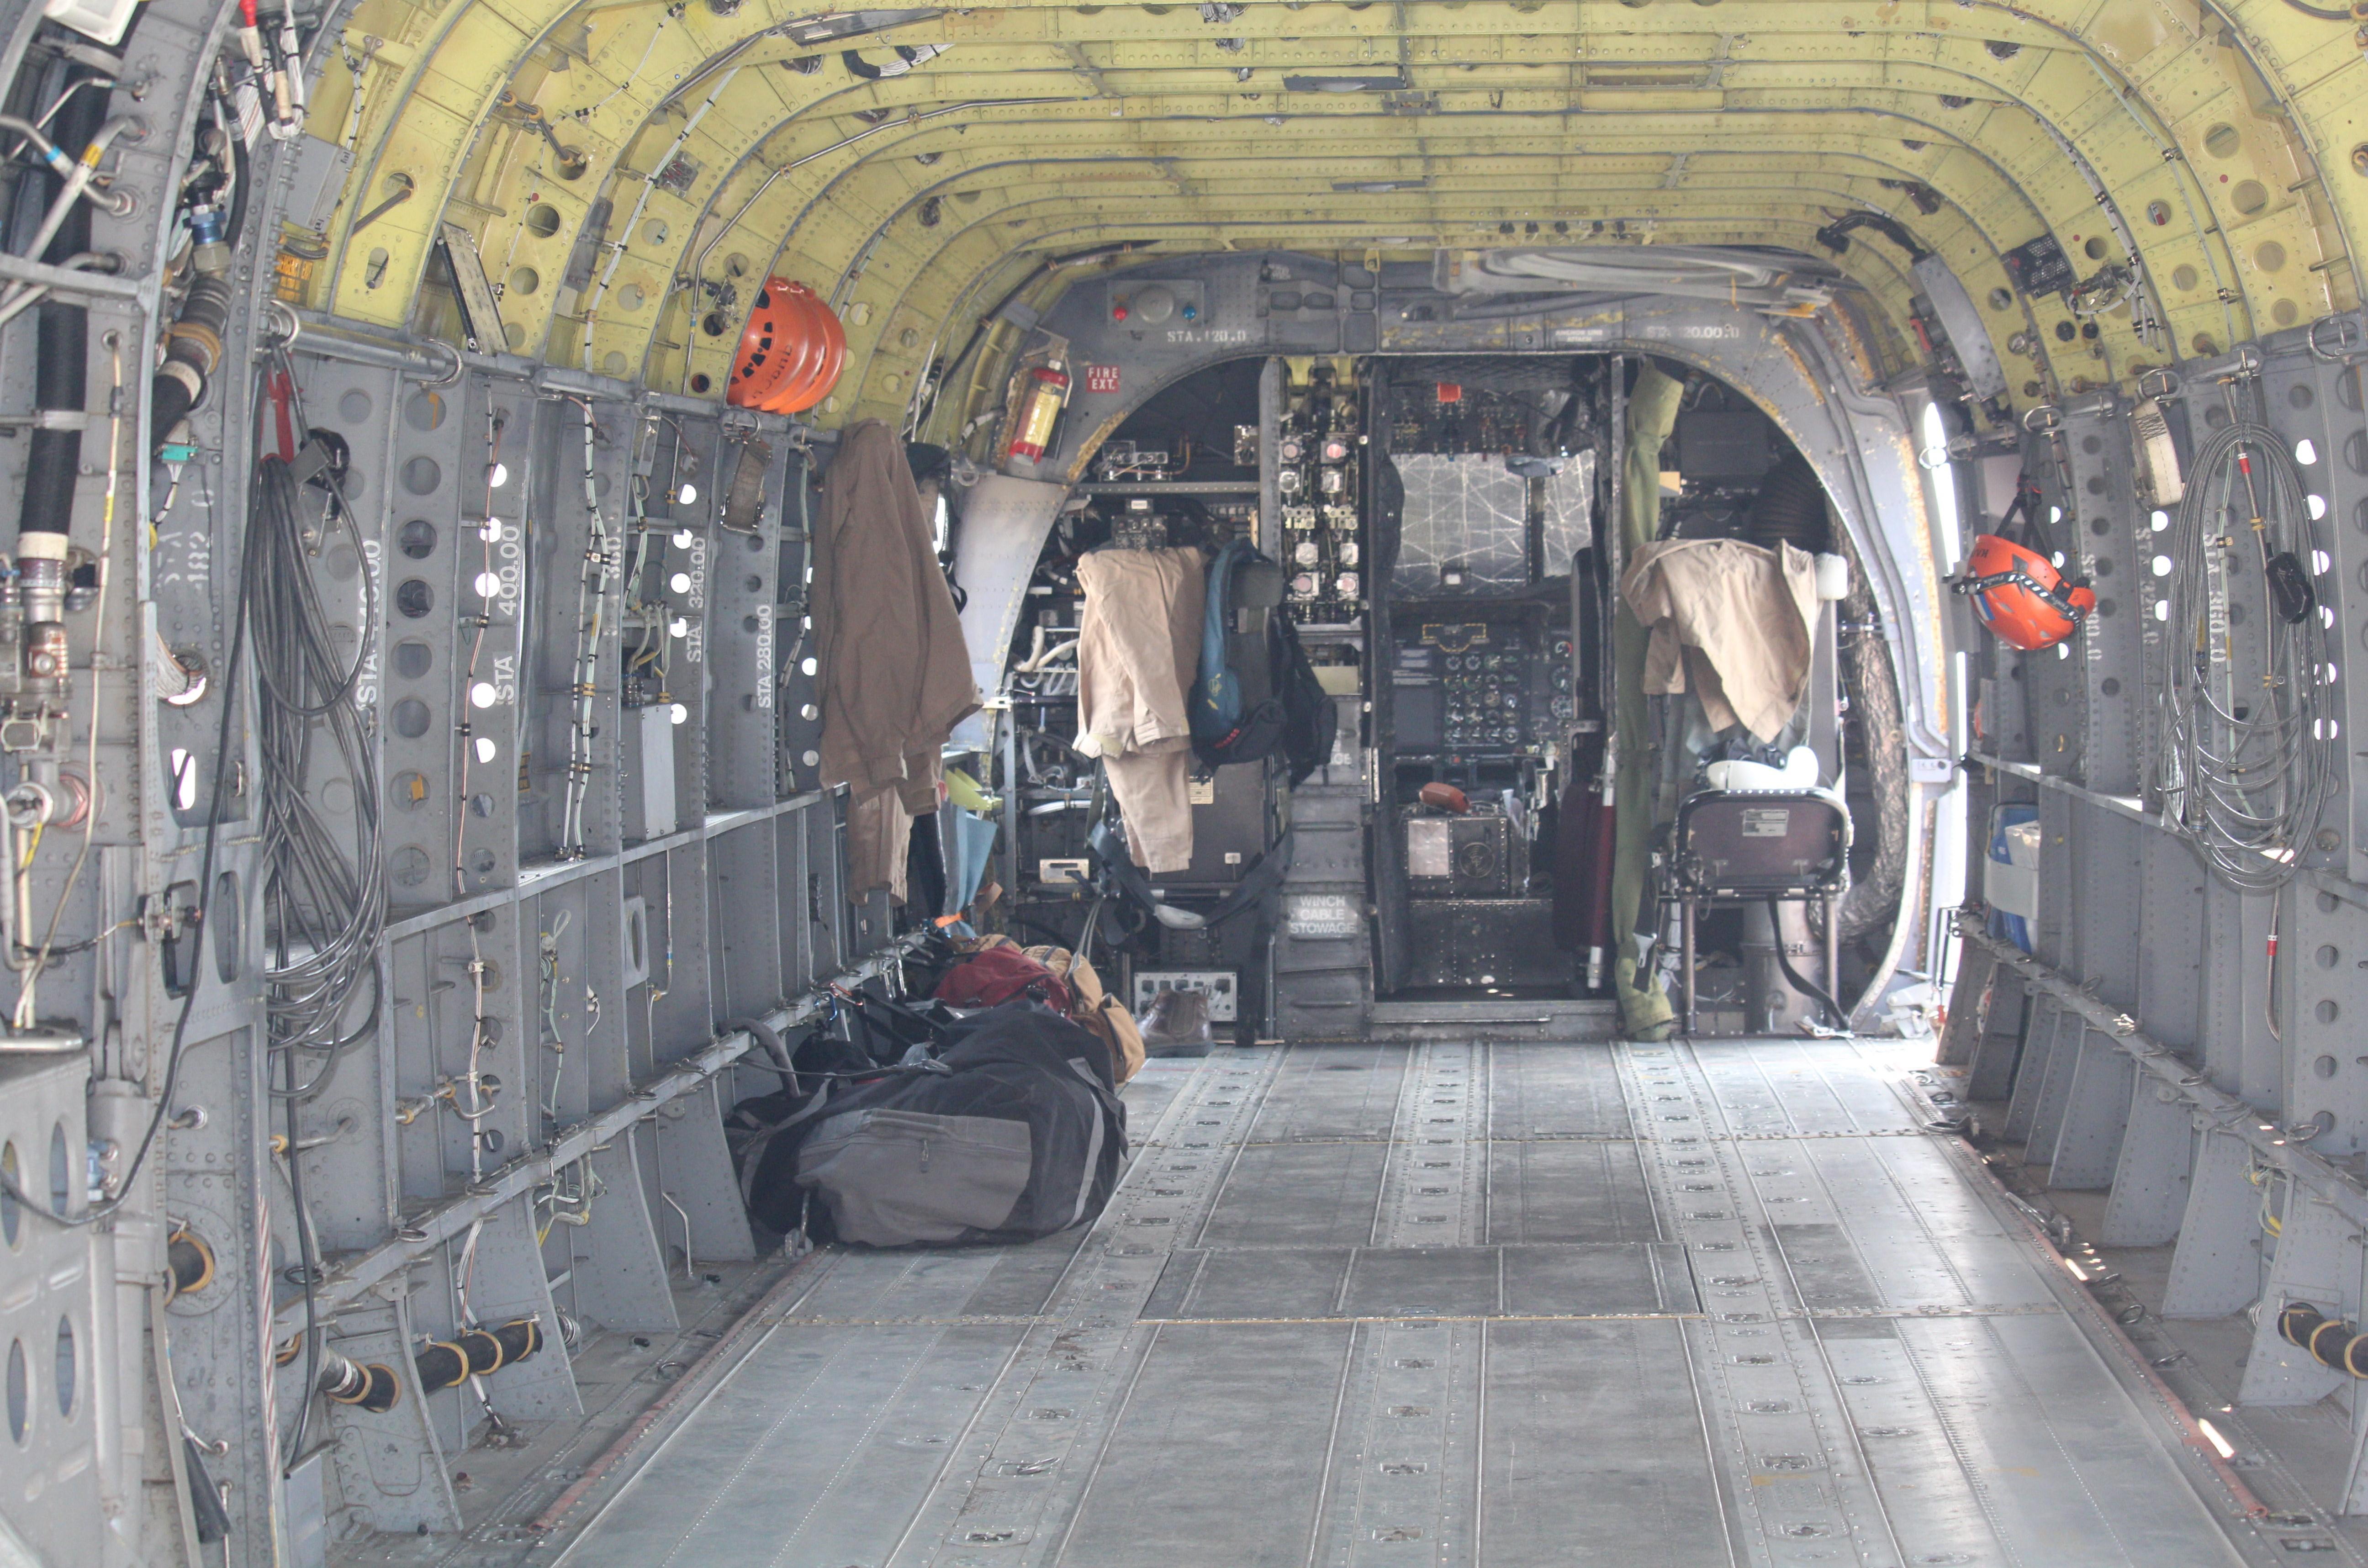 Inside the cockpit of a helicopter, two seats surrounded by wires, gages and metal supports